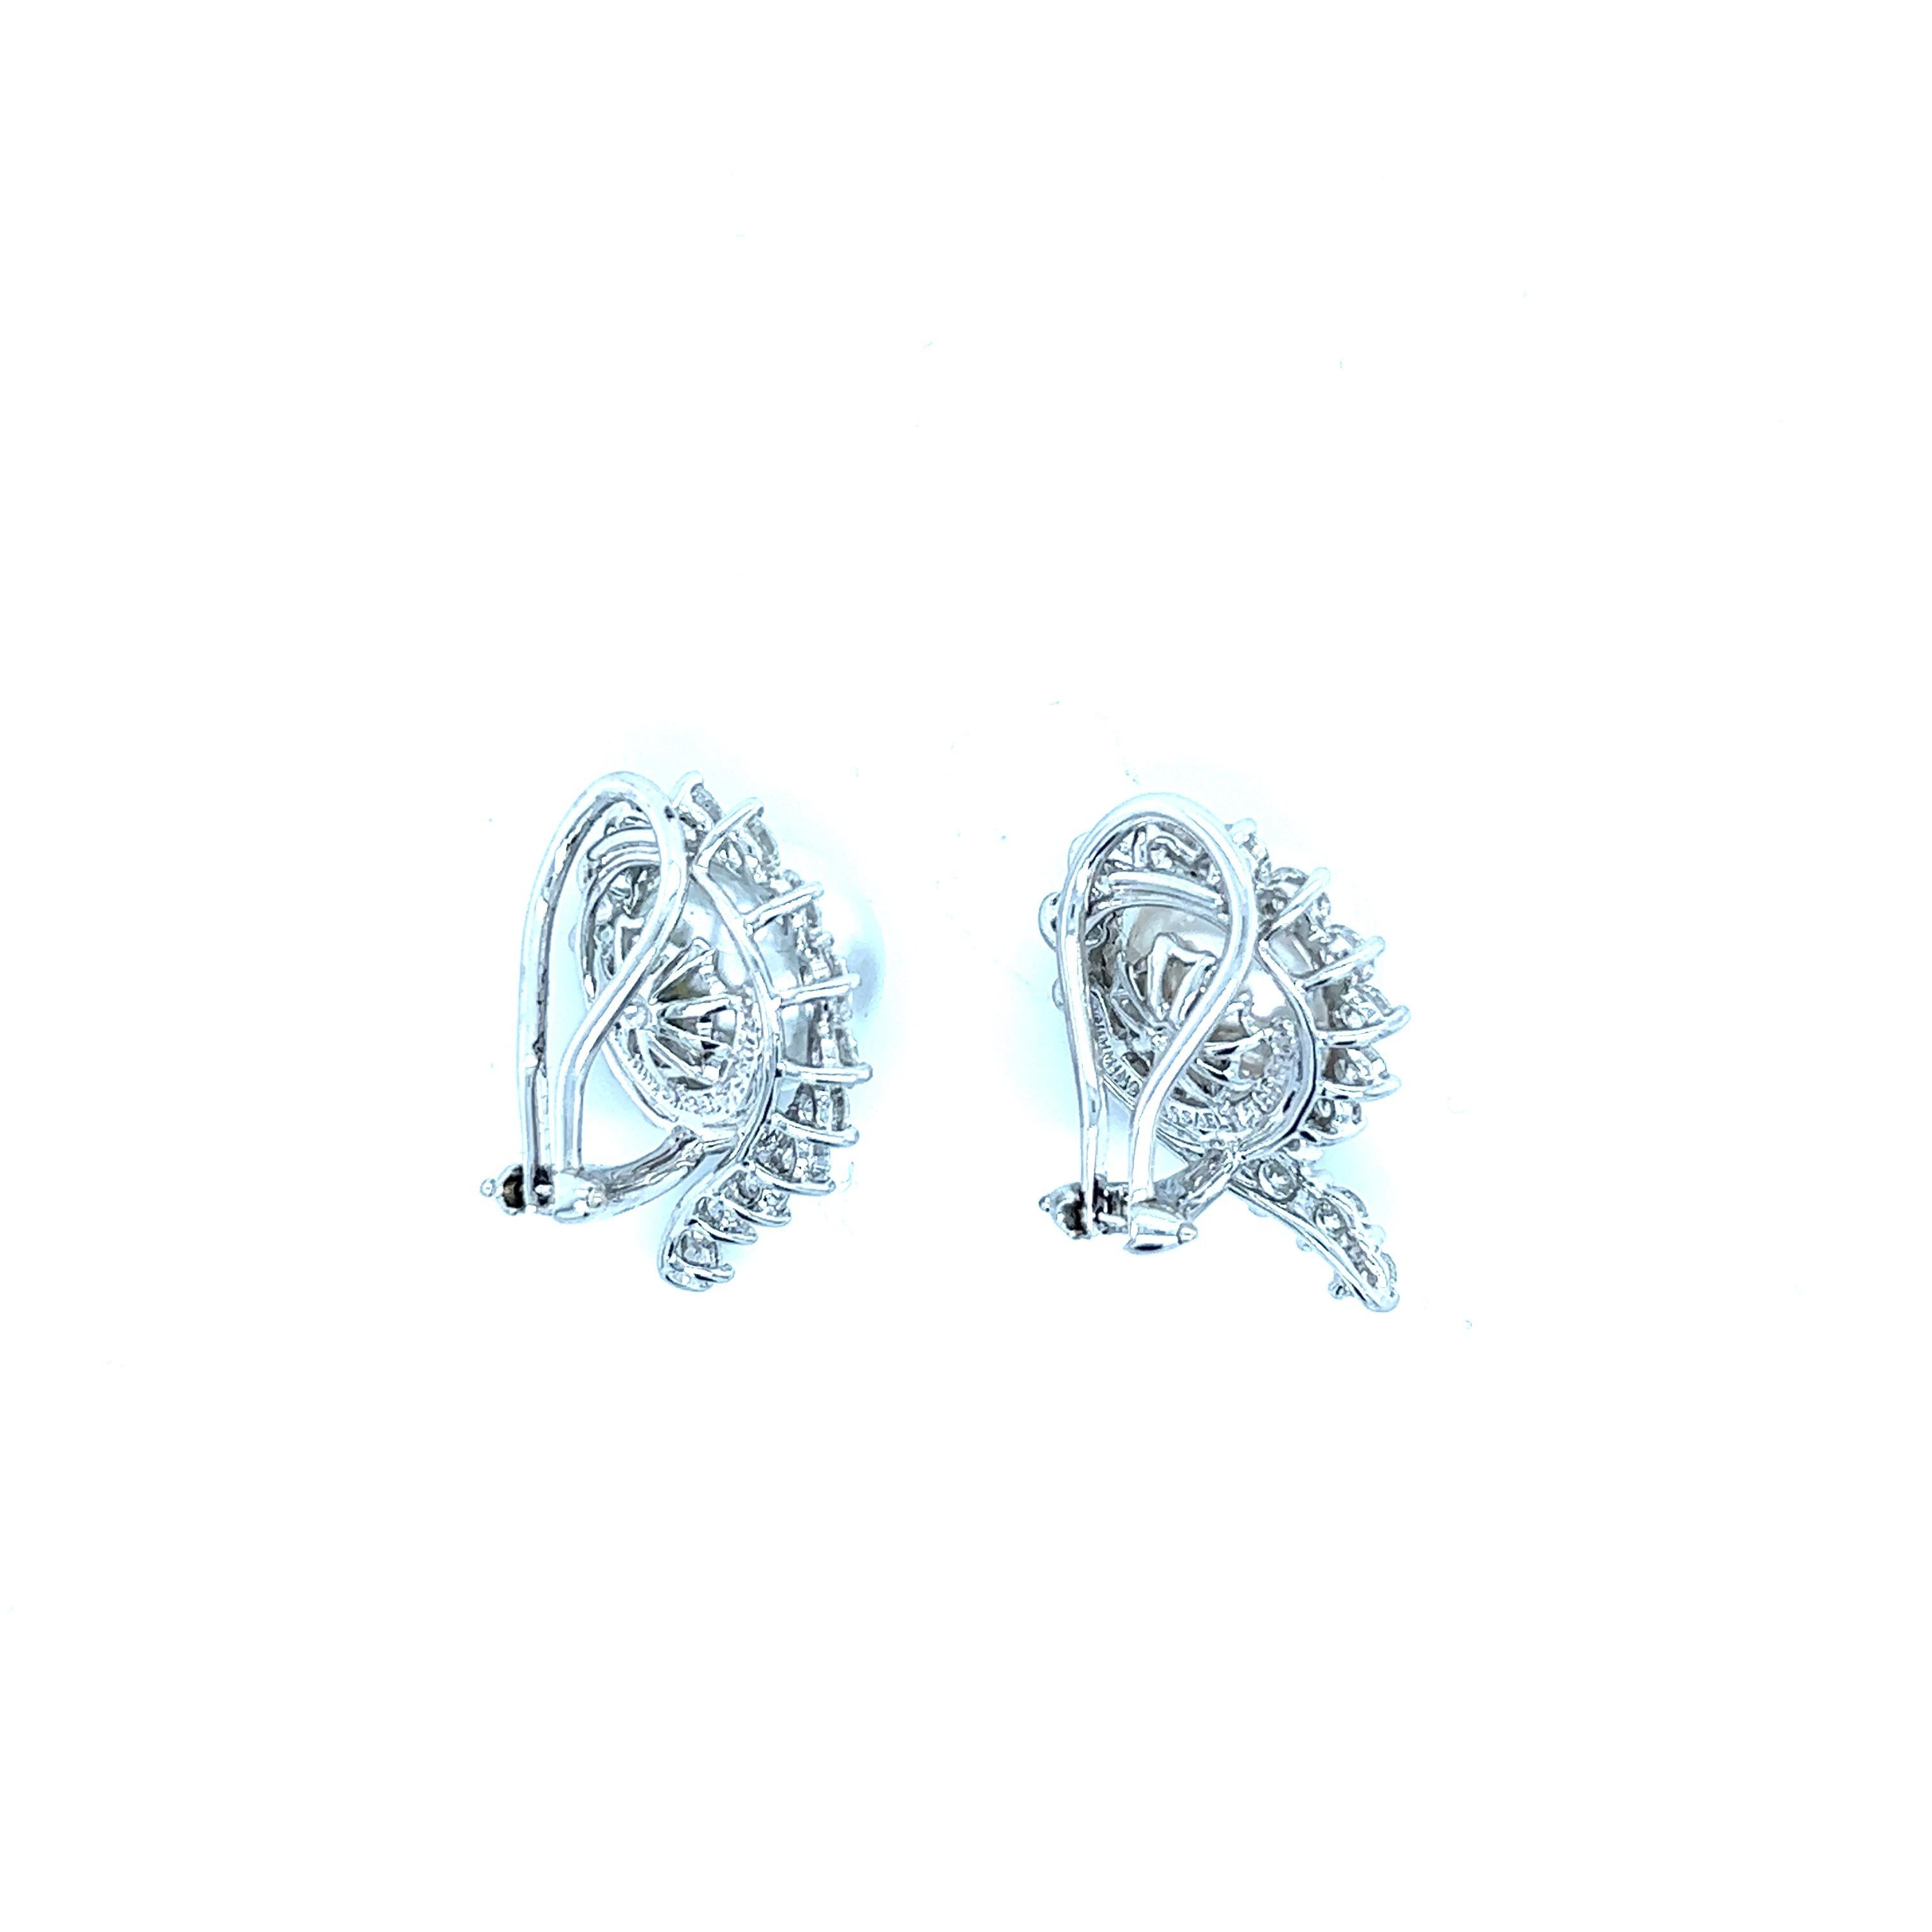 Angela Cummings for Assael 18 karat white gold and platinum ear clips with pearls and diamonds. The pearl's diameter is 1.1 cm. The beautiful, white diamonds weigh approximately 3 carats. Marked: Cummings / Assael / Plat 950 / 750. Total weight: